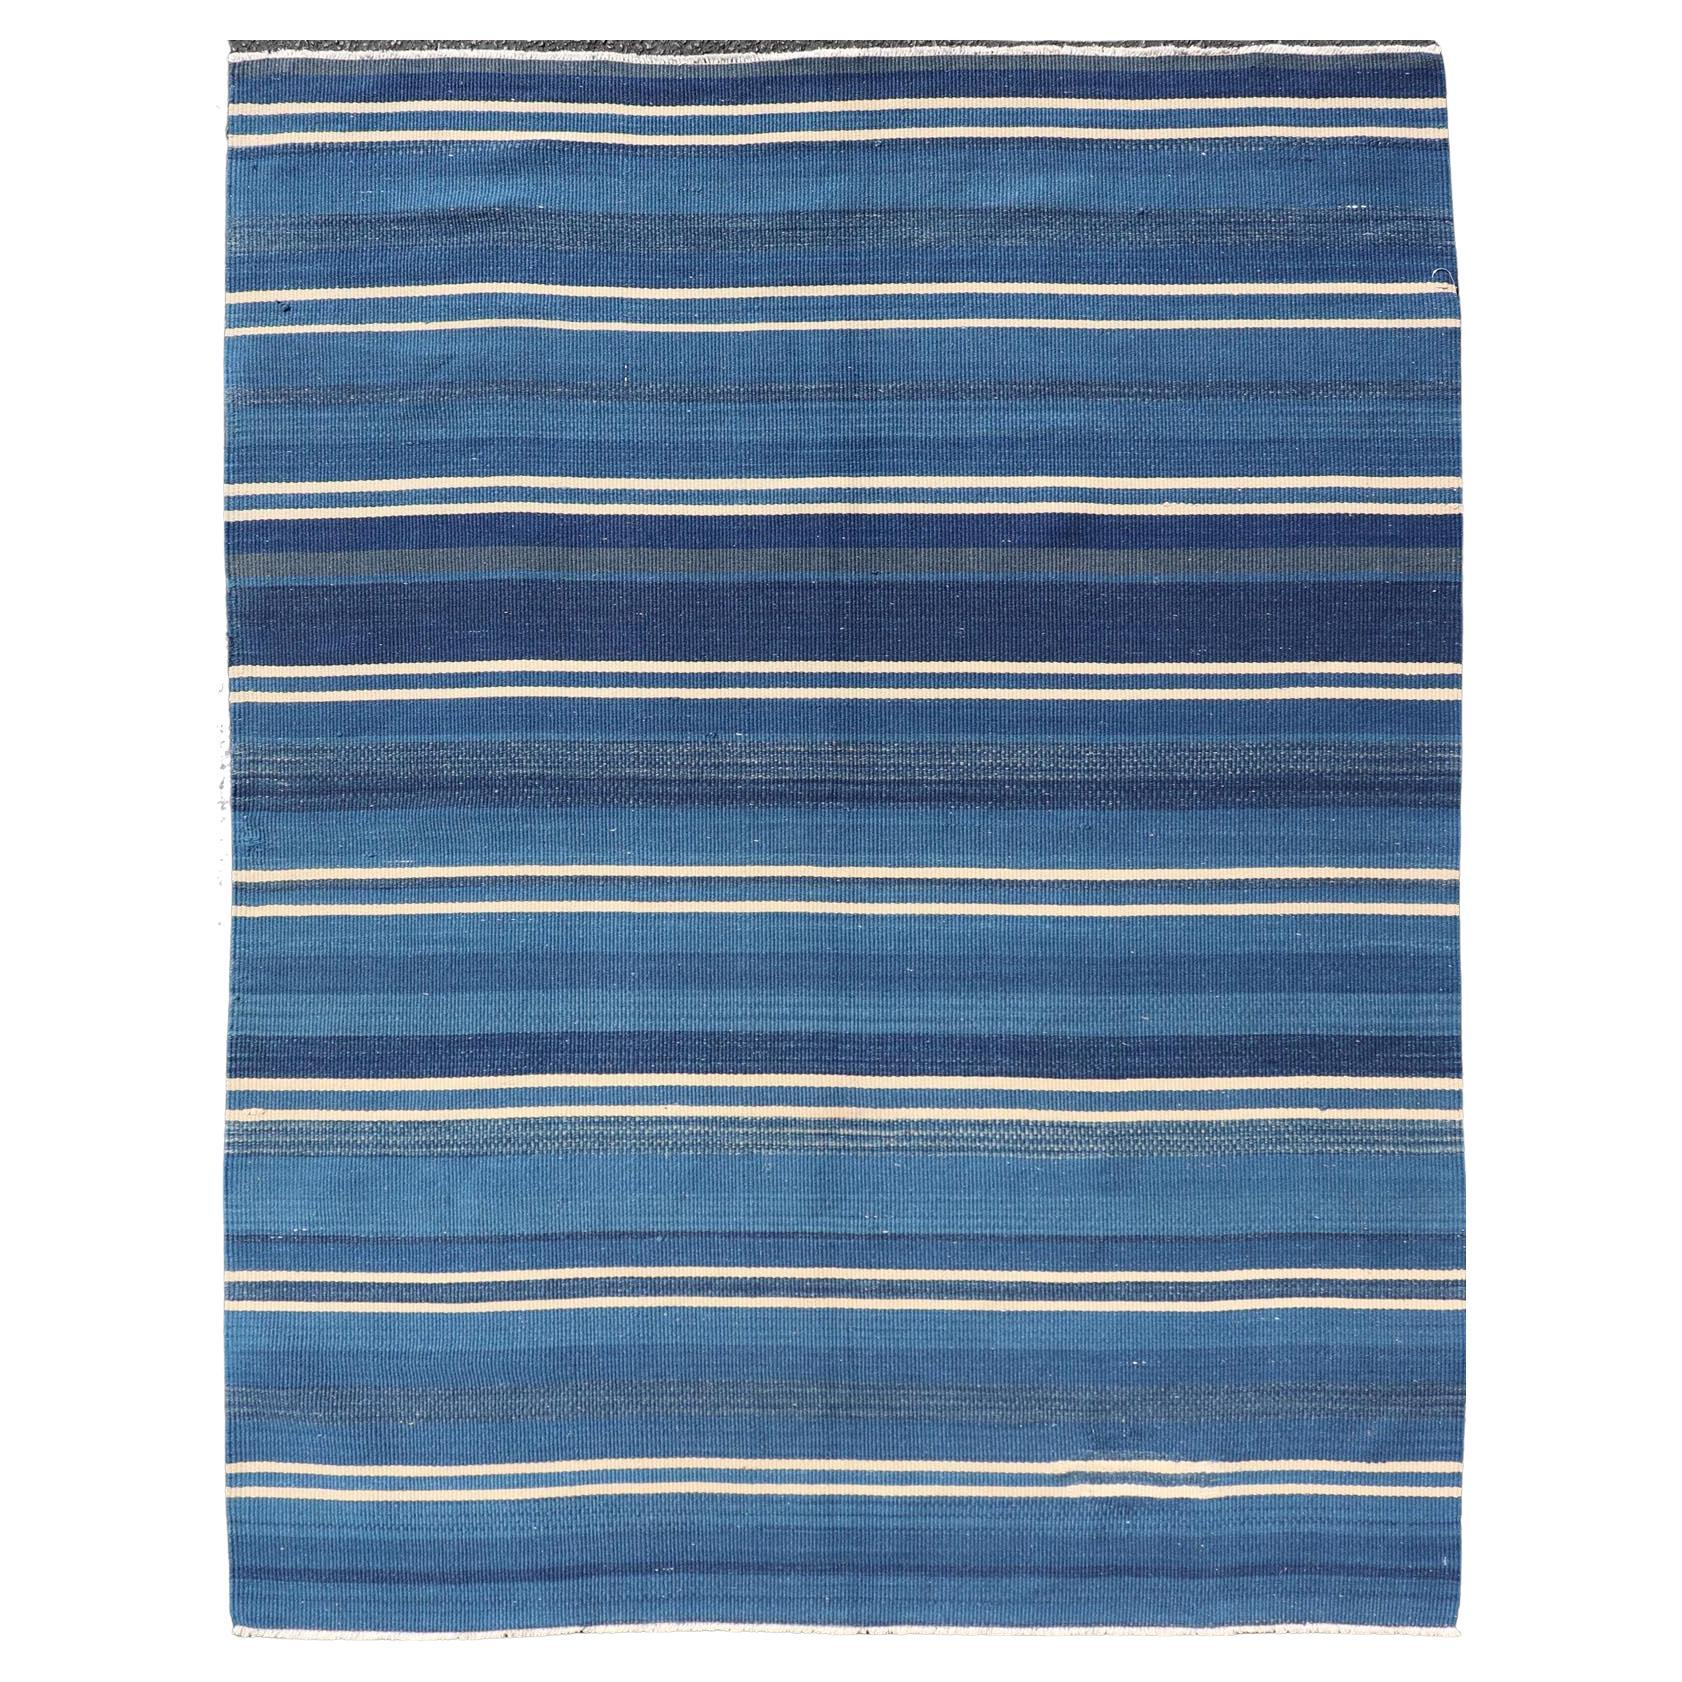 Turkish Flat-Weave Kilim in Navy Blue and Ivory in Striped Design